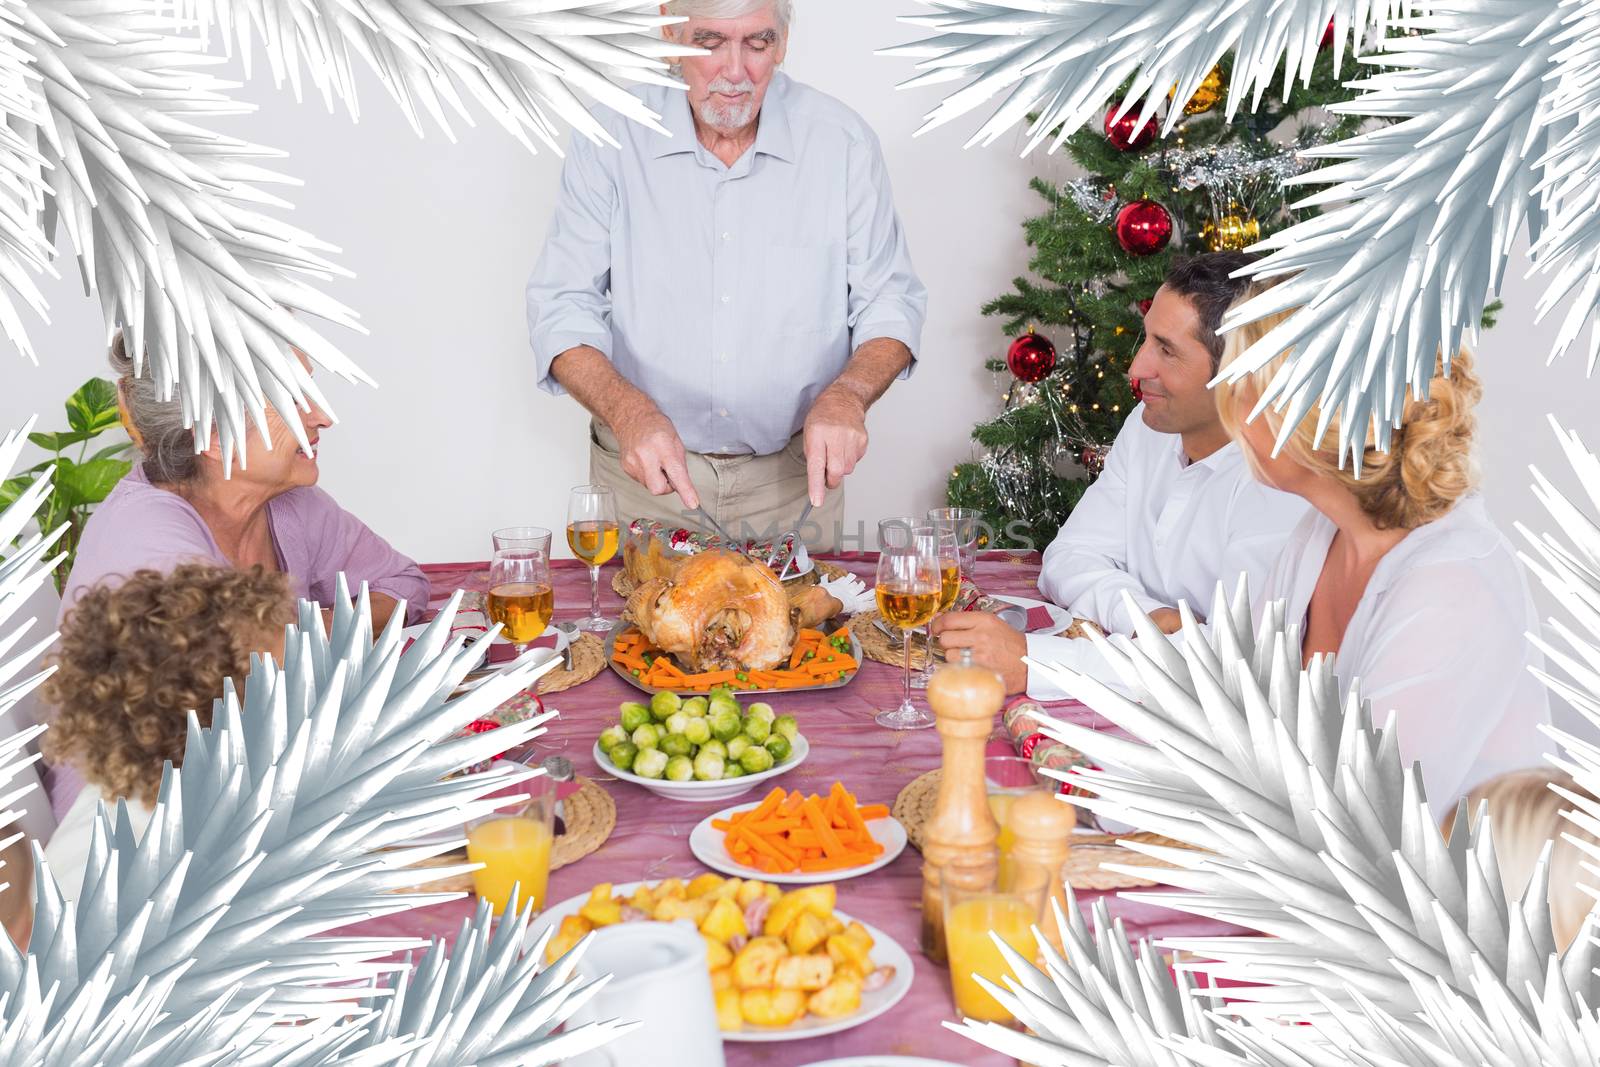 Composite image of grandfather carving the turkey against fir tree branches forming frame